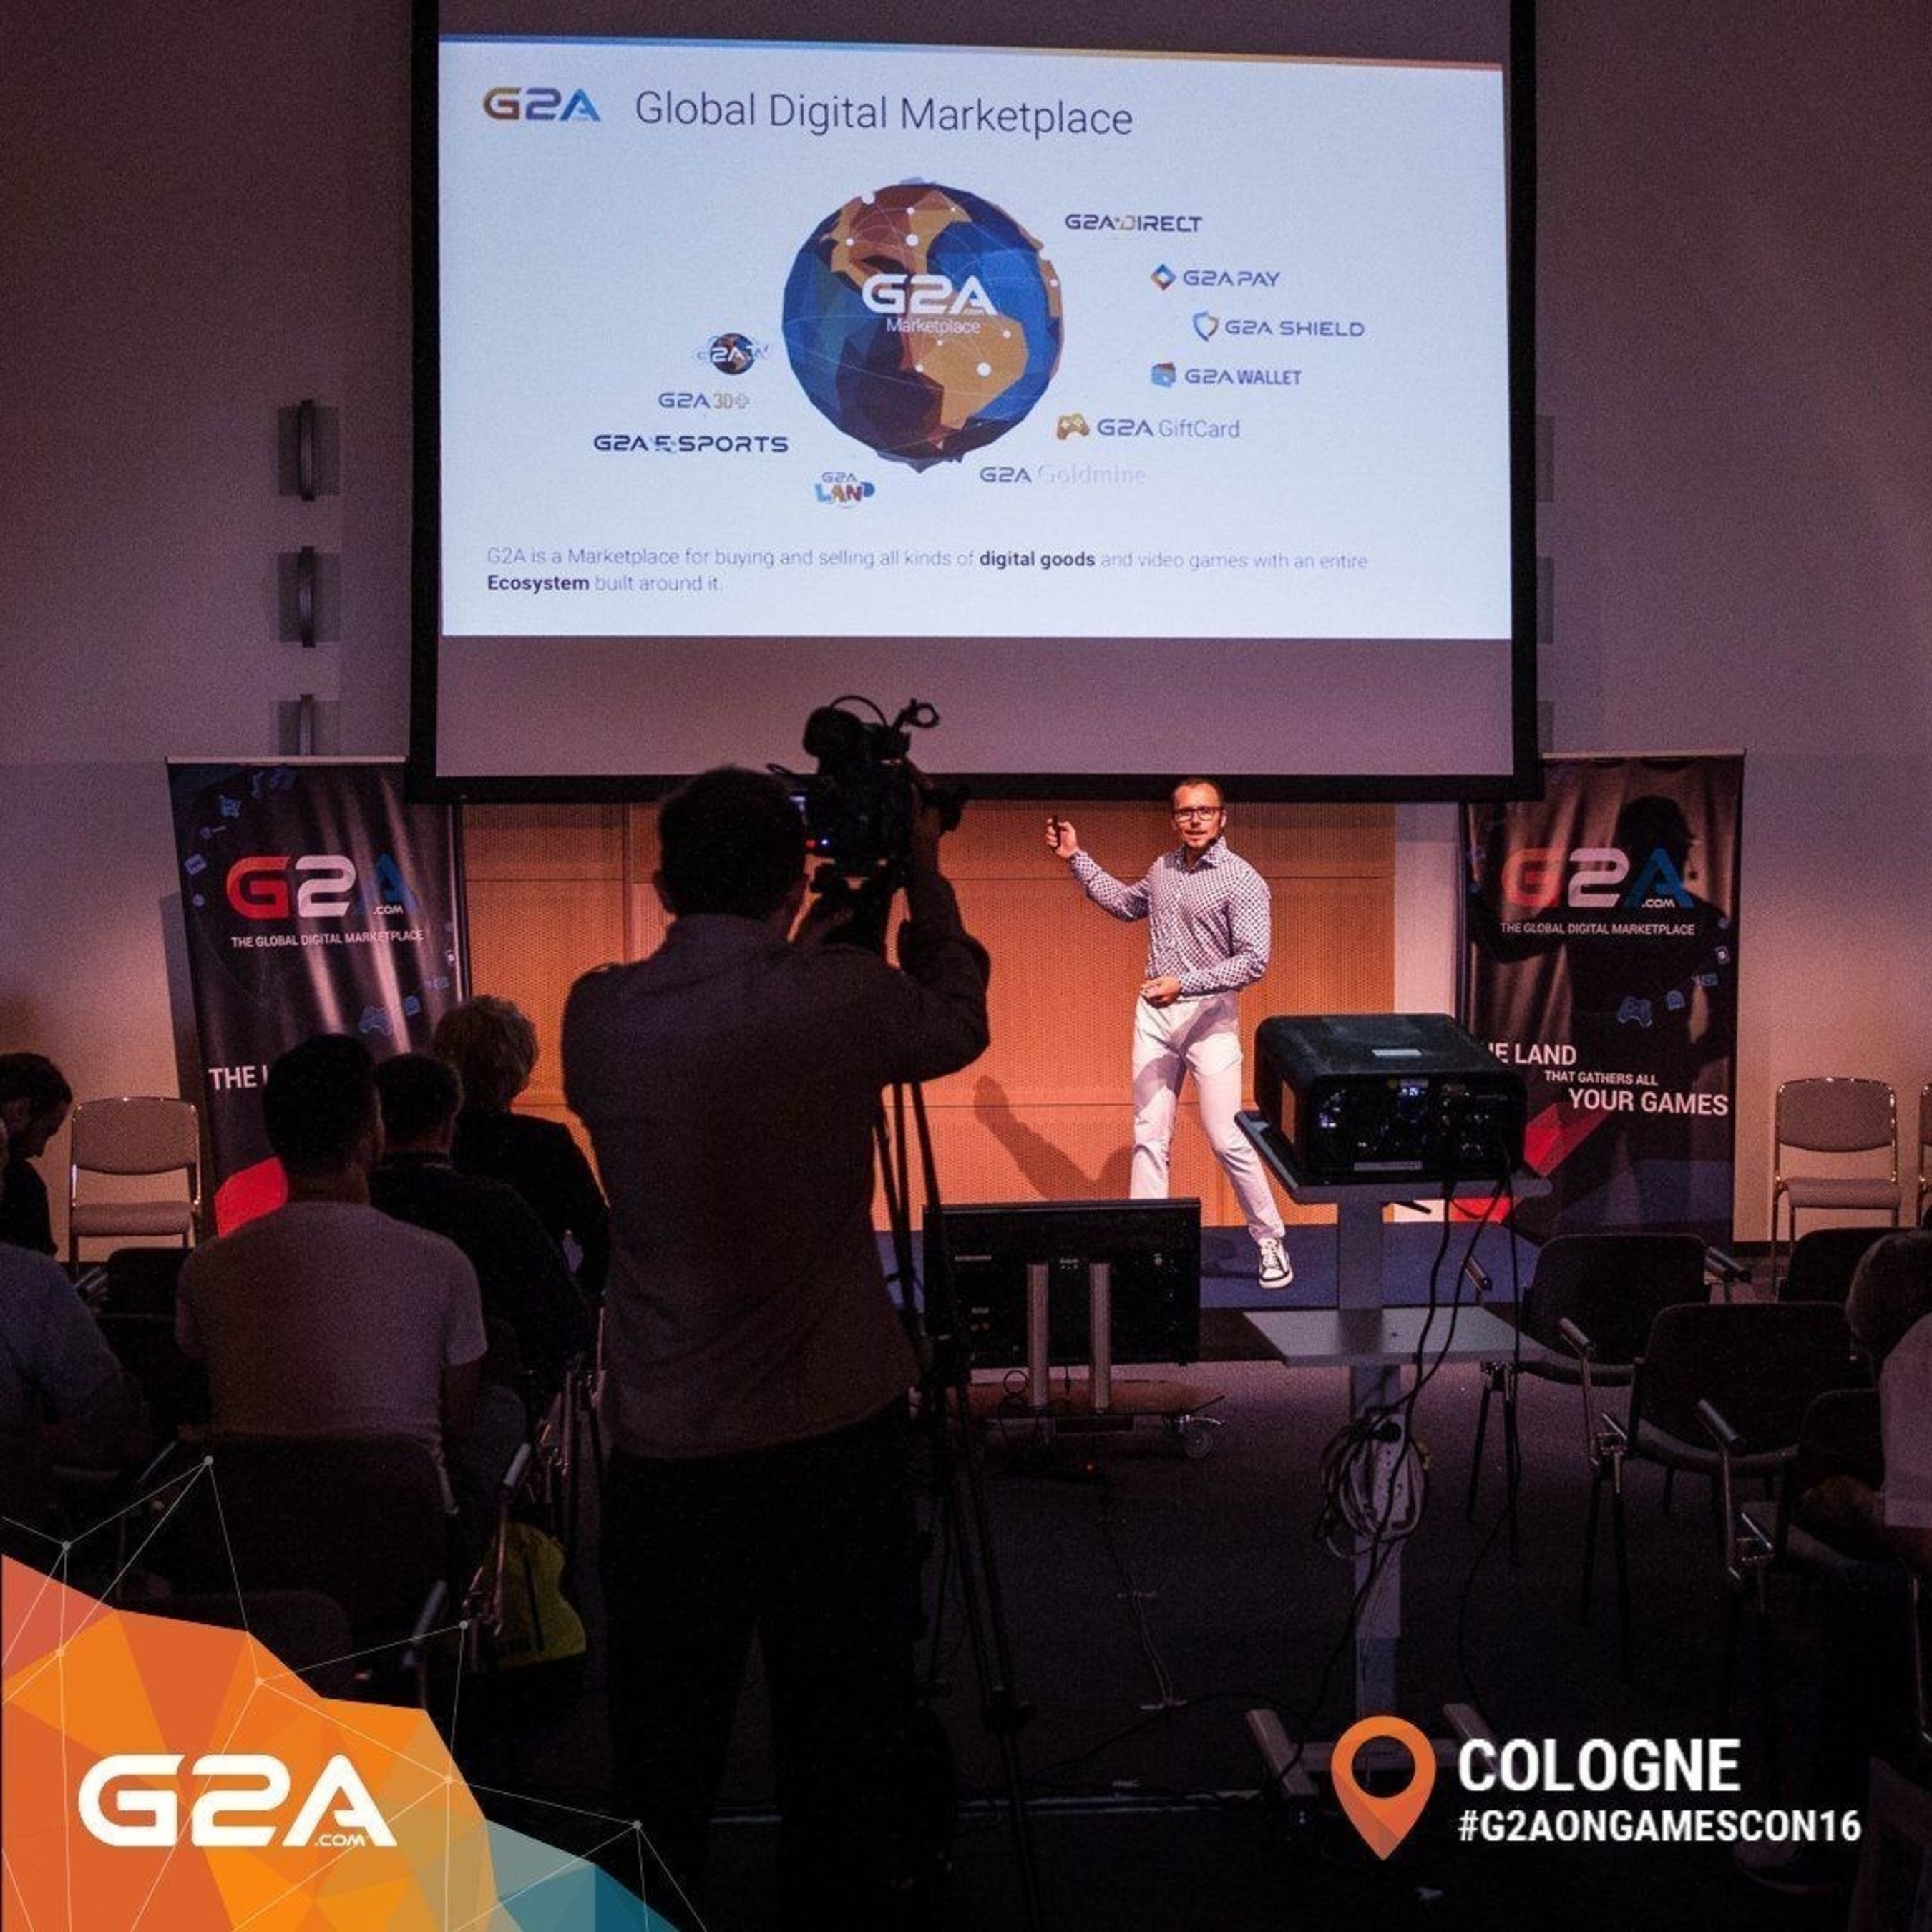 CEO of G2A Bartosz Skwarczek, at the G2A Press Conference at Gamescom 2016. Presenting the G2A Ecosystem to international journalists. (PRNewsFoto/G2A.com)